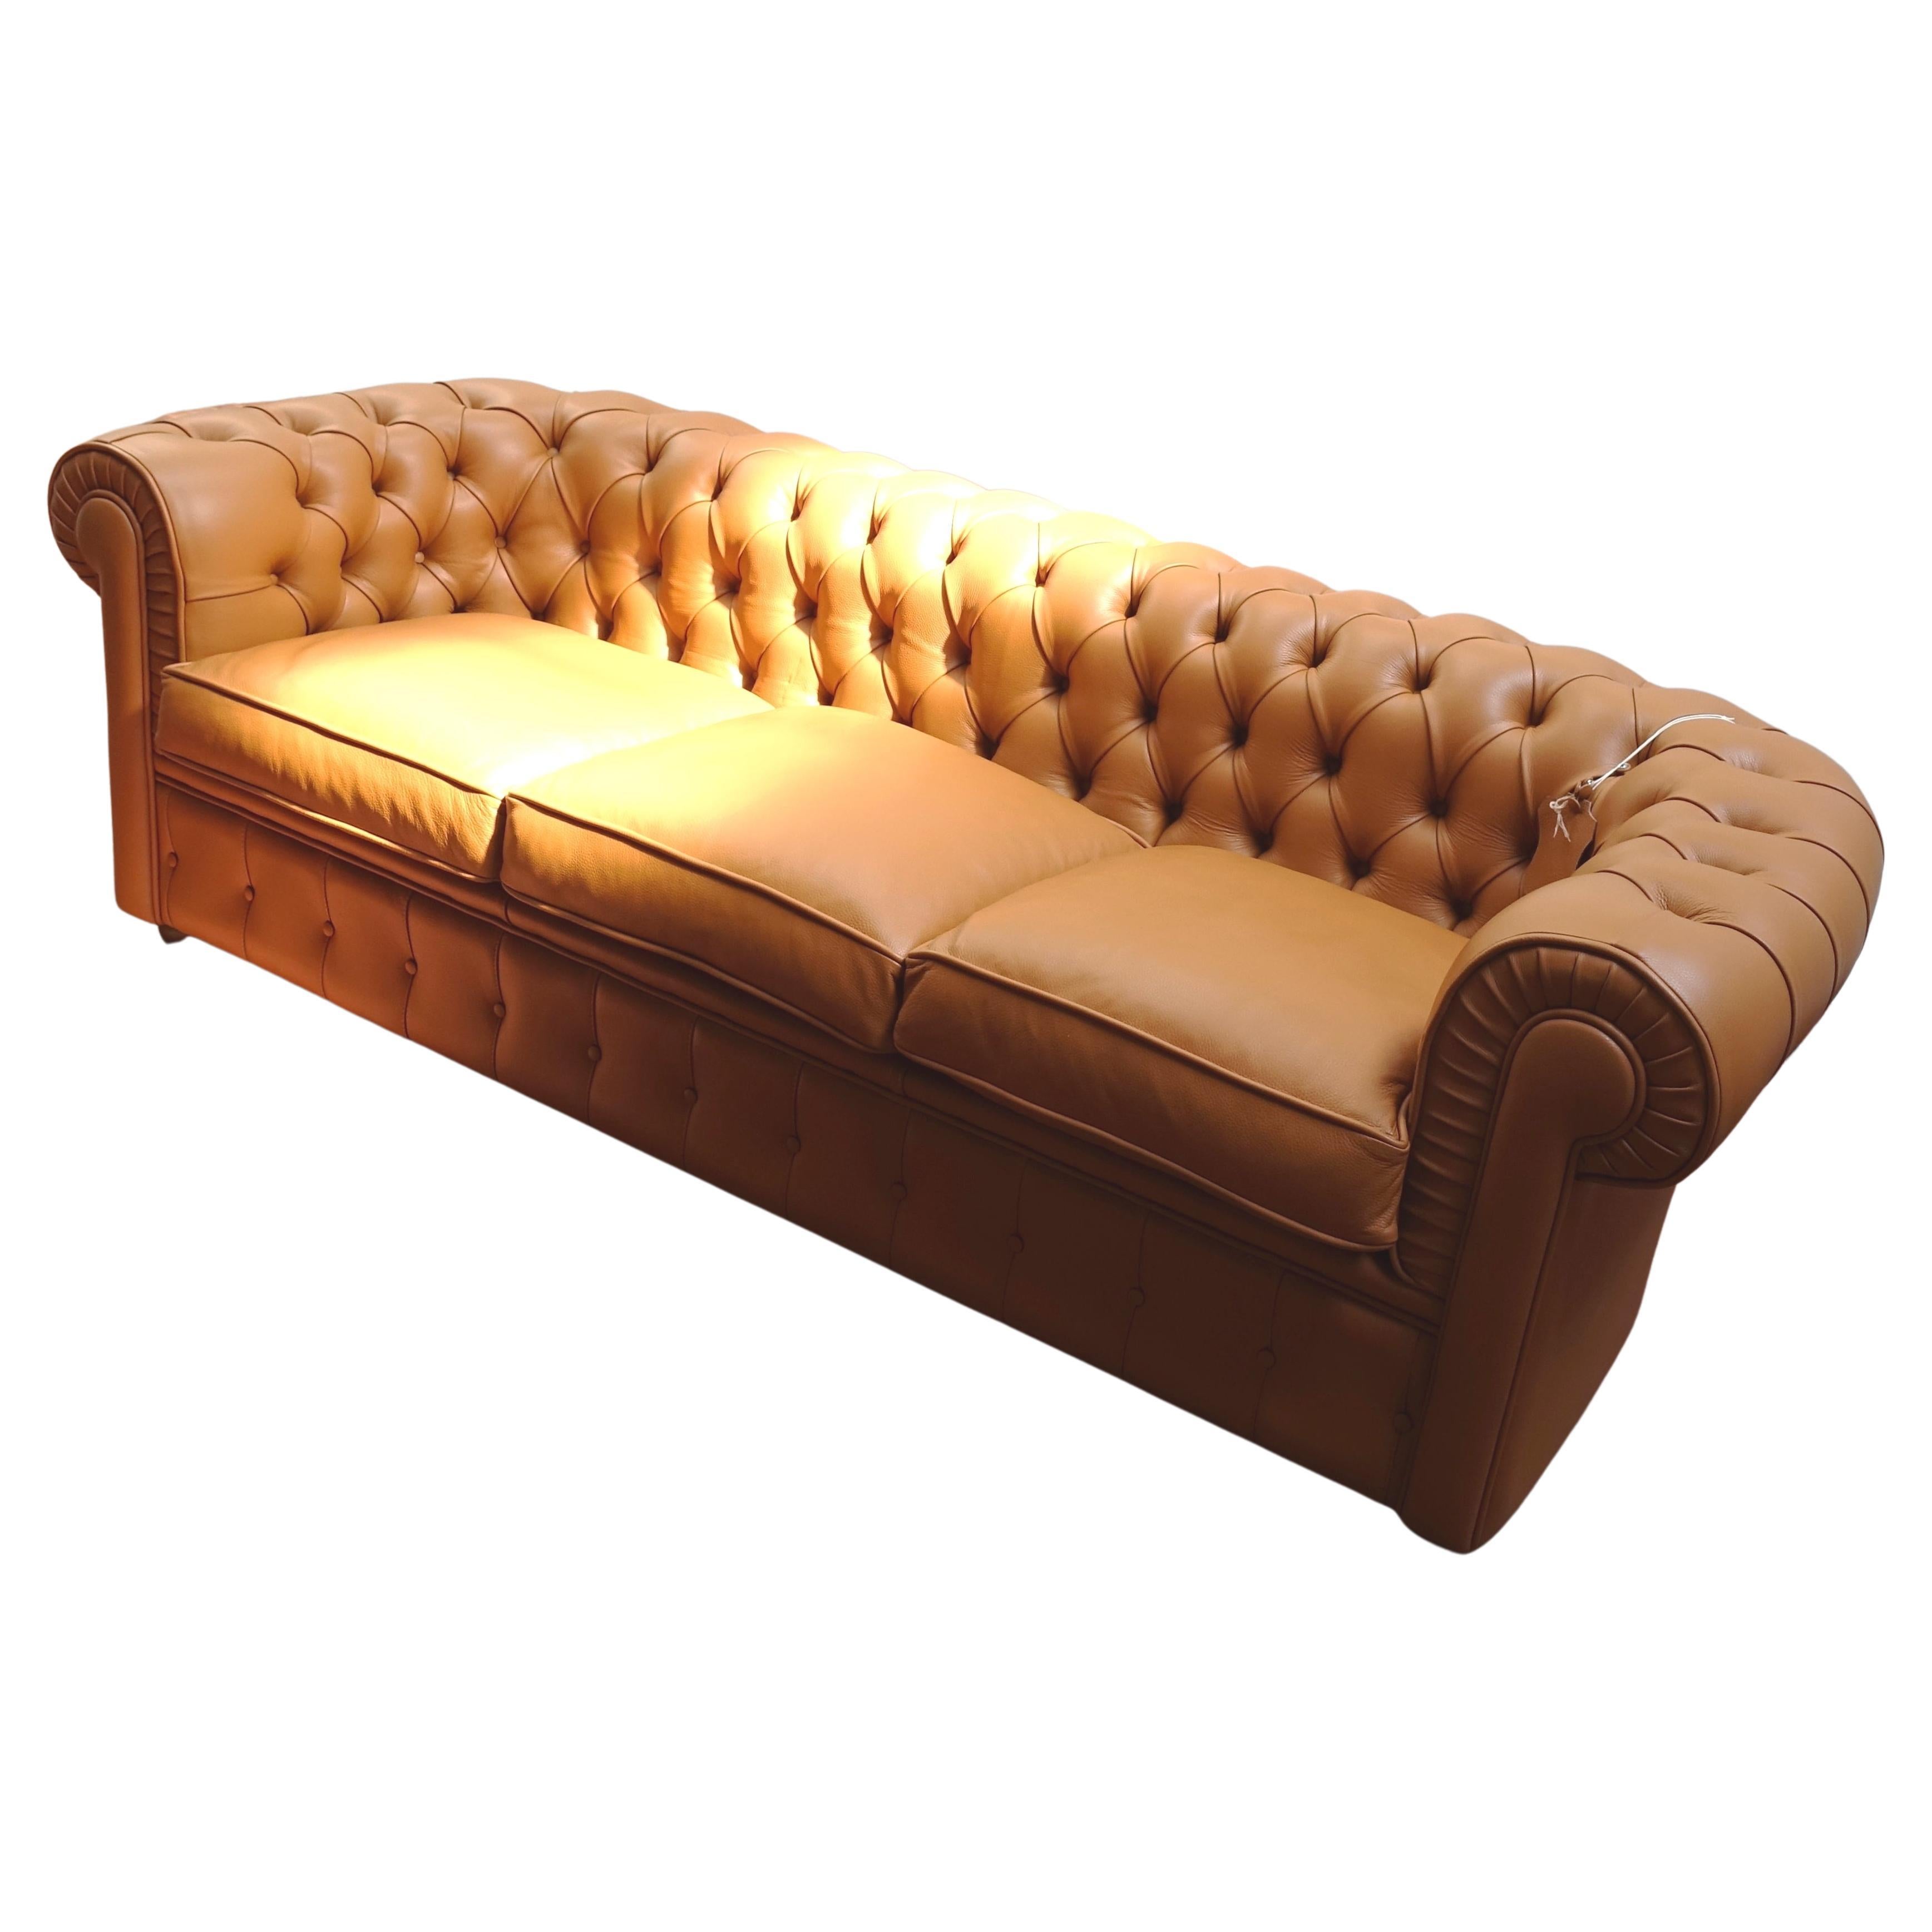 Chesterfield Classic Vintage Sofa Natural Materials Sofa Chesterfield Style Sofa Living Room 4260499872274 